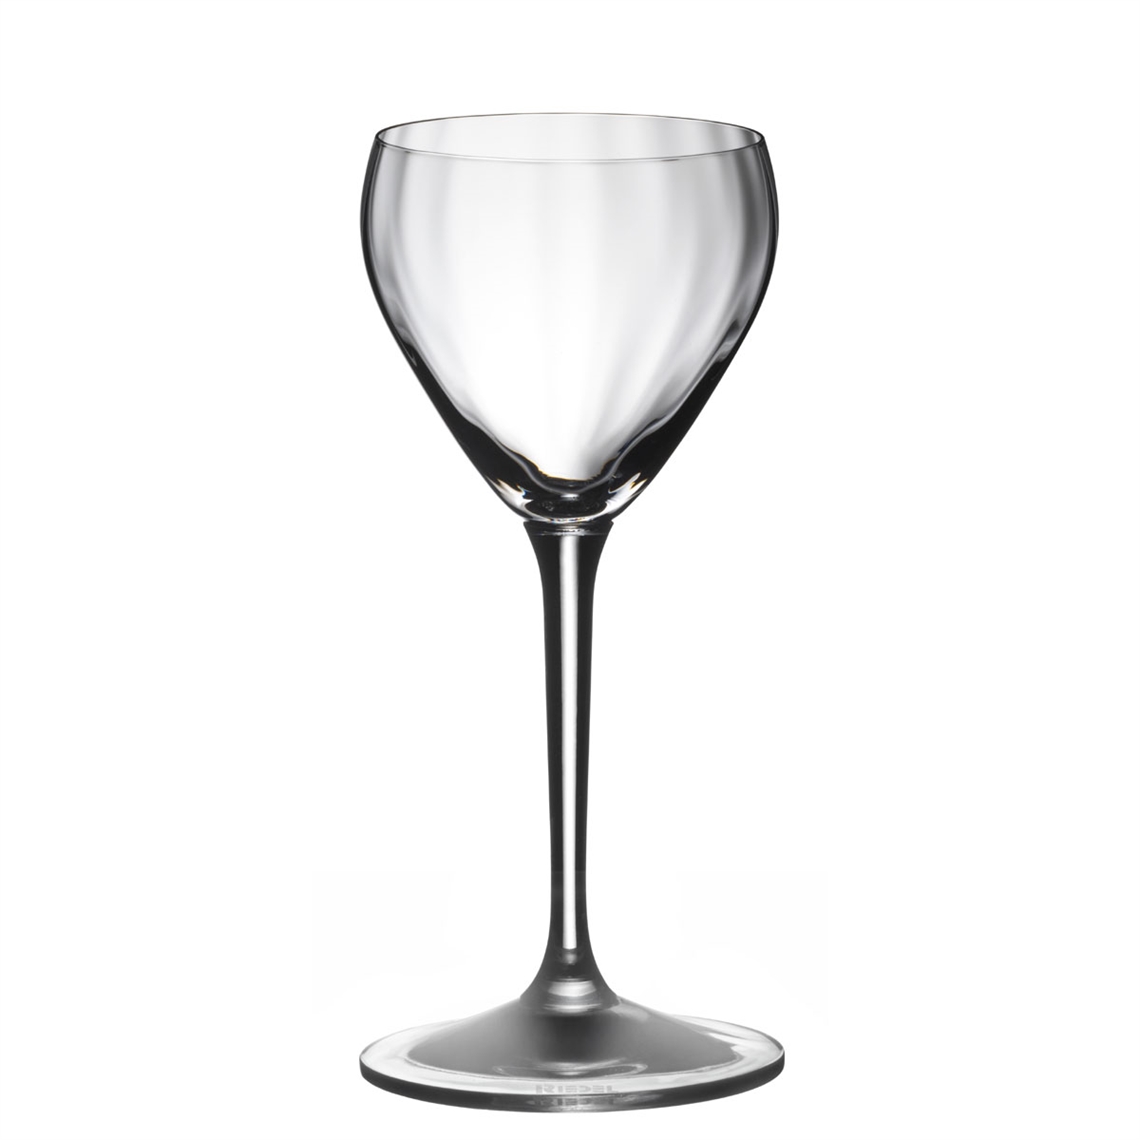 Riedel Restaurant Bar - Drink Specific - Large Nick & Nora Glass Optic Effect 198ml - 0417/08